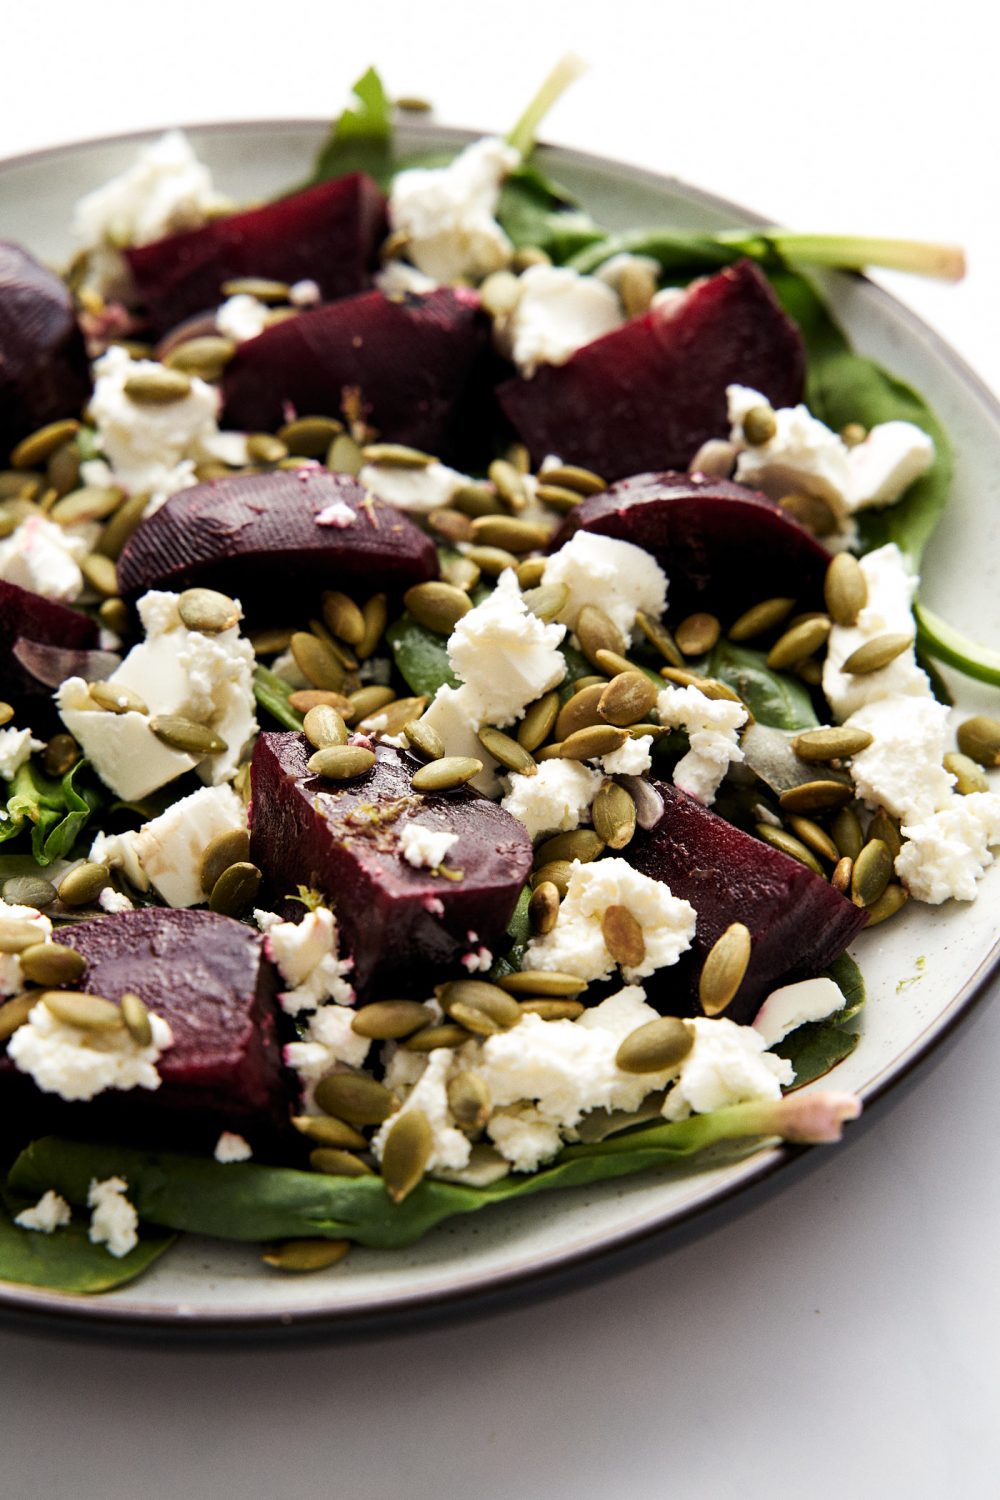 Beet salad with feta and spinach and pumpkin seeds. Step by step recipe with photos